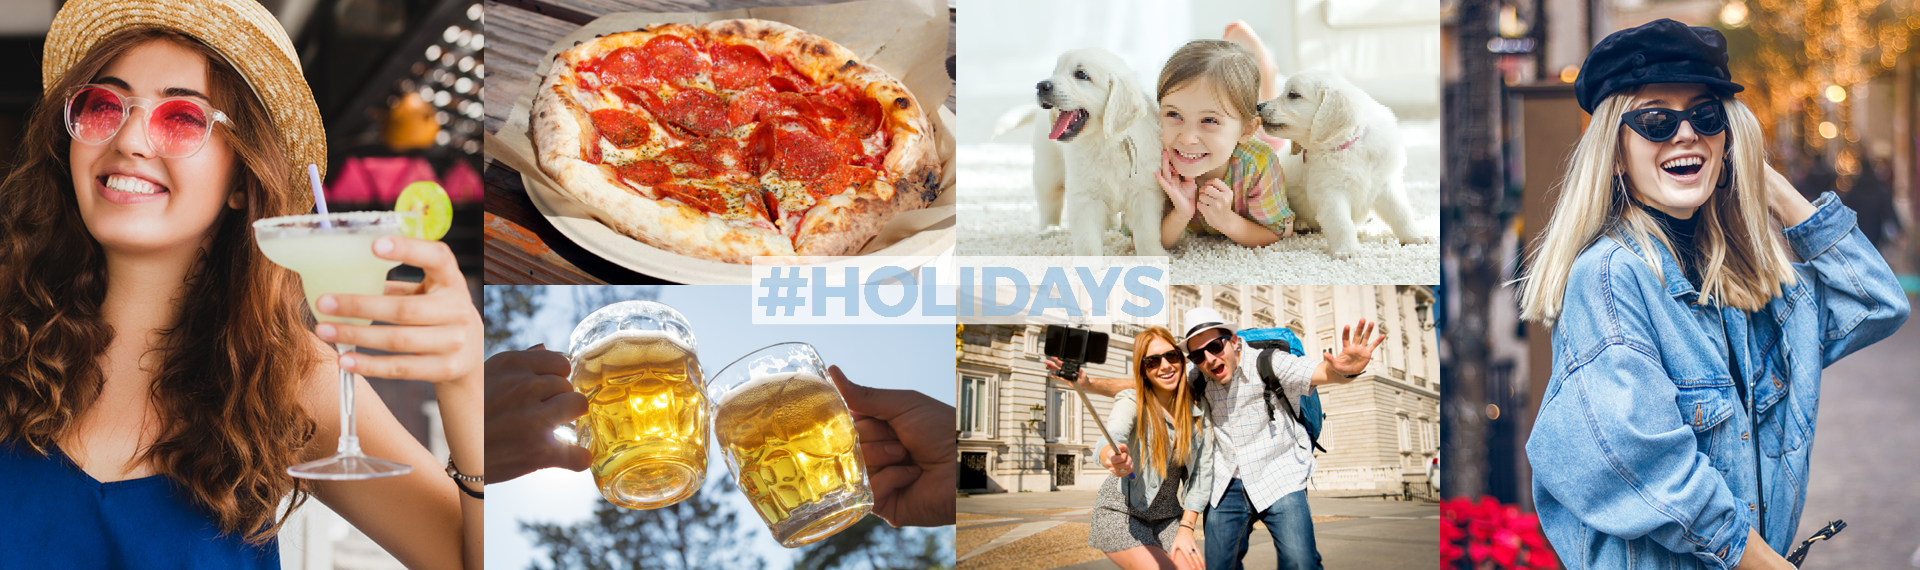 A List of ‘Hashtag Holidays’ to Celebrate on Social Media